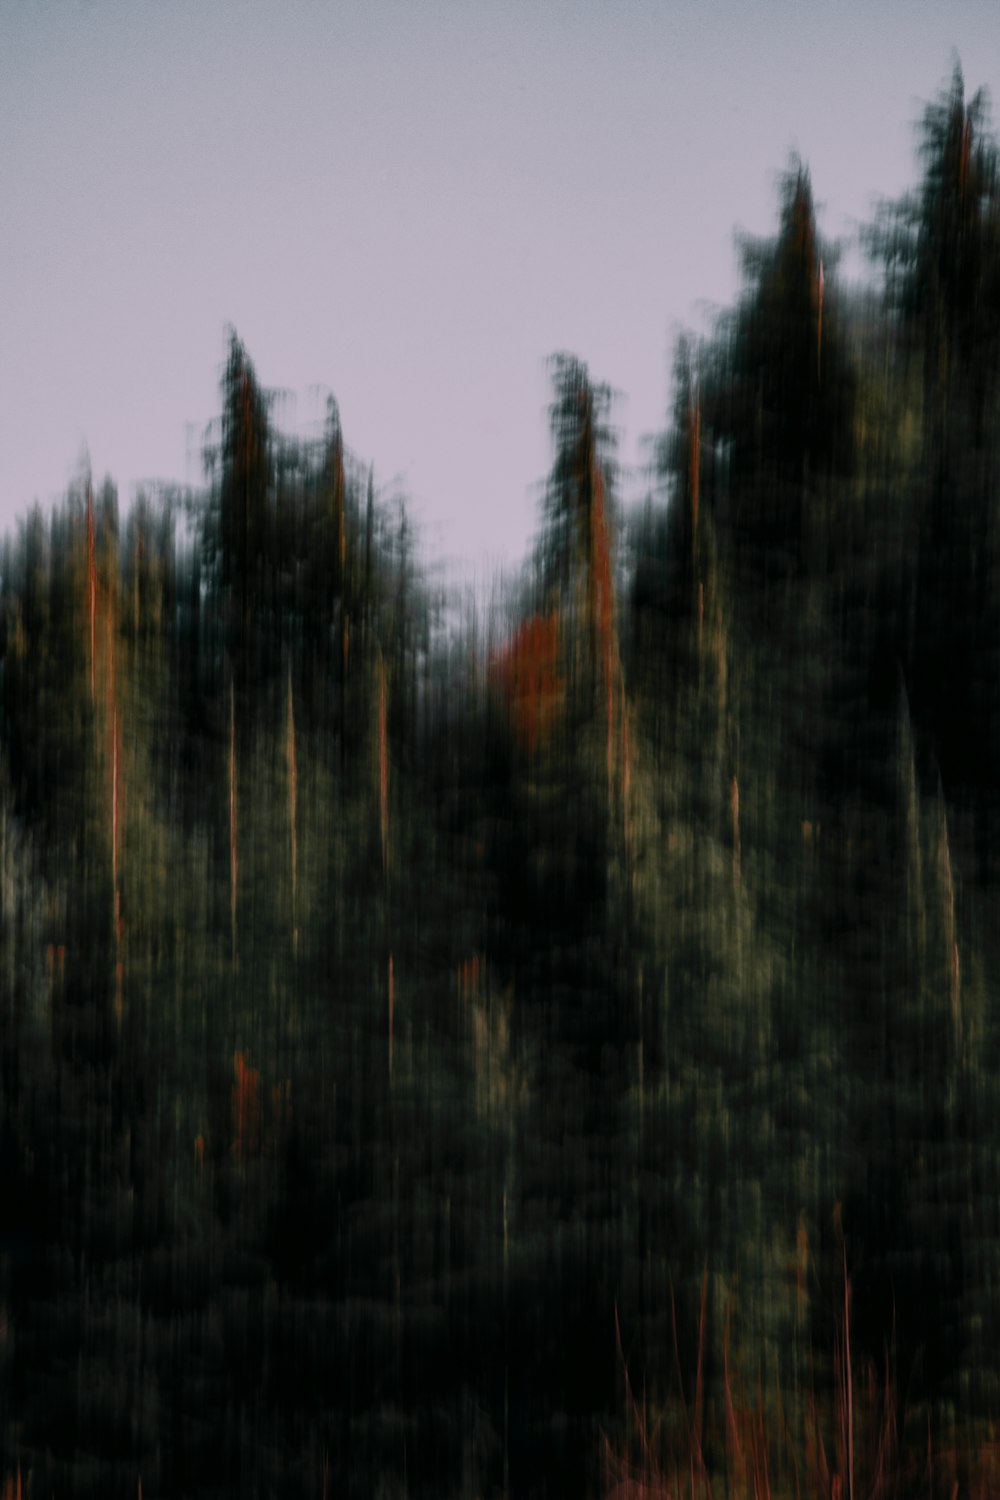 a blurry photo of a forest with trees in the background